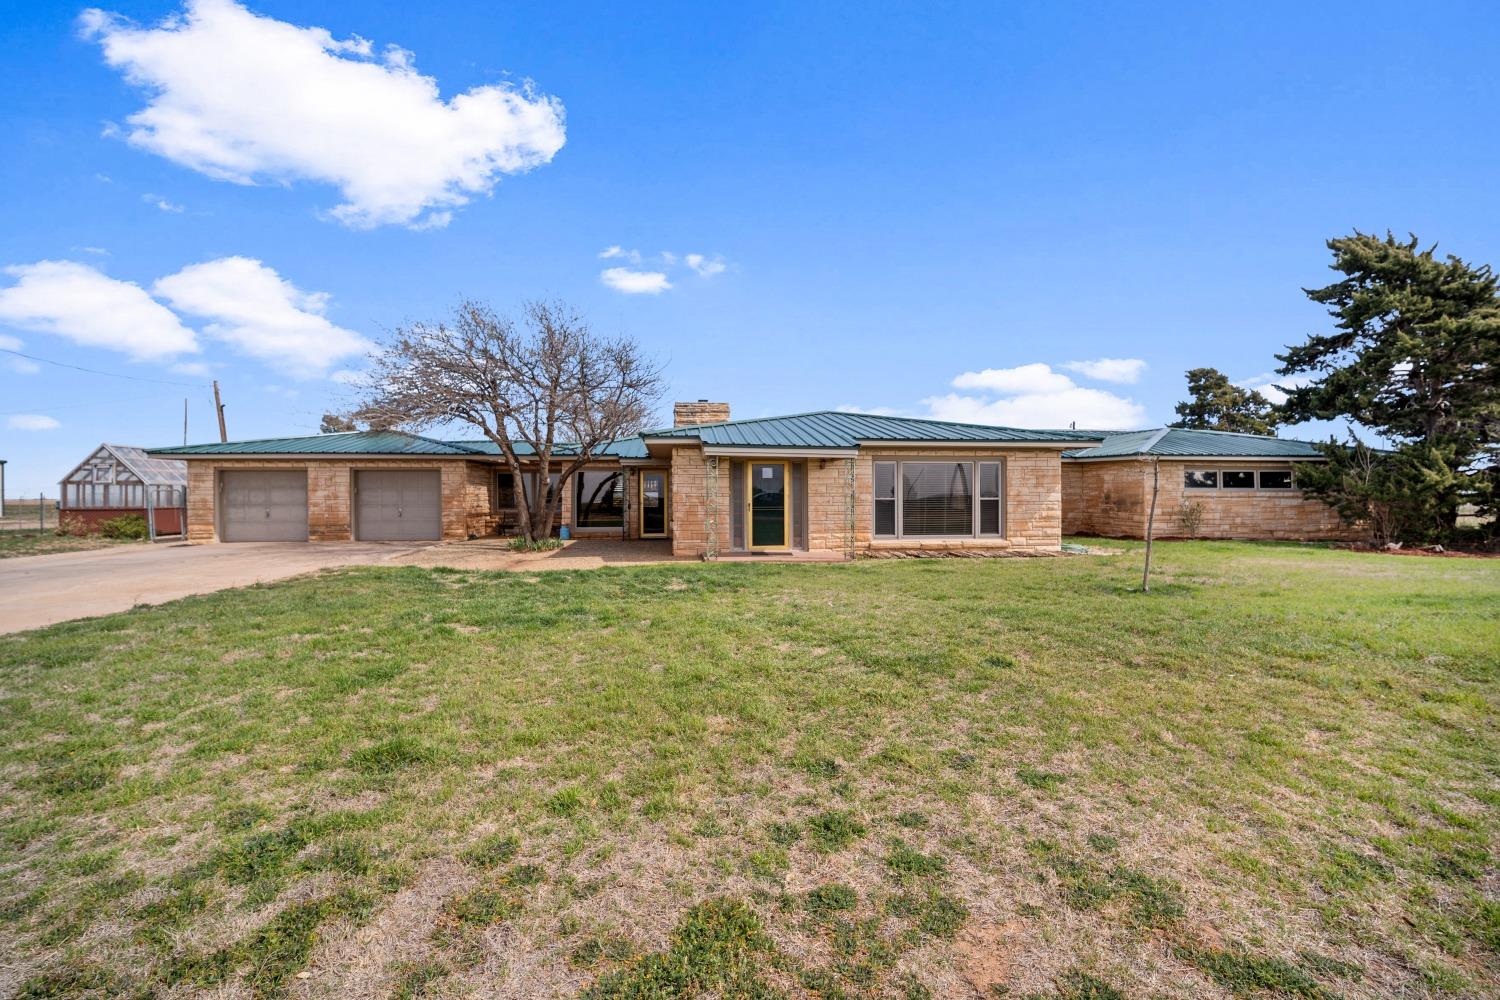 This beautiful ranch-style home is situated in a location that is far enough to enjoy the country, yet still close enough for convenience. With breathtaking views of sunrises over the cotton fields to the east and sunsets in the west, it's hard to imagine ever wanting to leave. The home boasts 3 spacious bedrooms, 3 extra-large bathrooms, 2 comfortable living areas, and a large kitchen. Living the country life on 5 acres couldn't be better, especially with the opportunity to bring your horses, goats, chickens, and other animals with you. You can even watch your very own catfish and blue gill bobbing for food in the pond, or try your hand at catch-and-release fishing. The 1/2 acre pond is fed by a well, and you can even enjoy swimming and paddle boating on it. When you're done playing in the water, you can relax on the cobblestone patio near the pond and enjoy a BBQ. Or maybe it's working in your very own greenhouse. Don't let this chance to experience West Texas living pass you by.